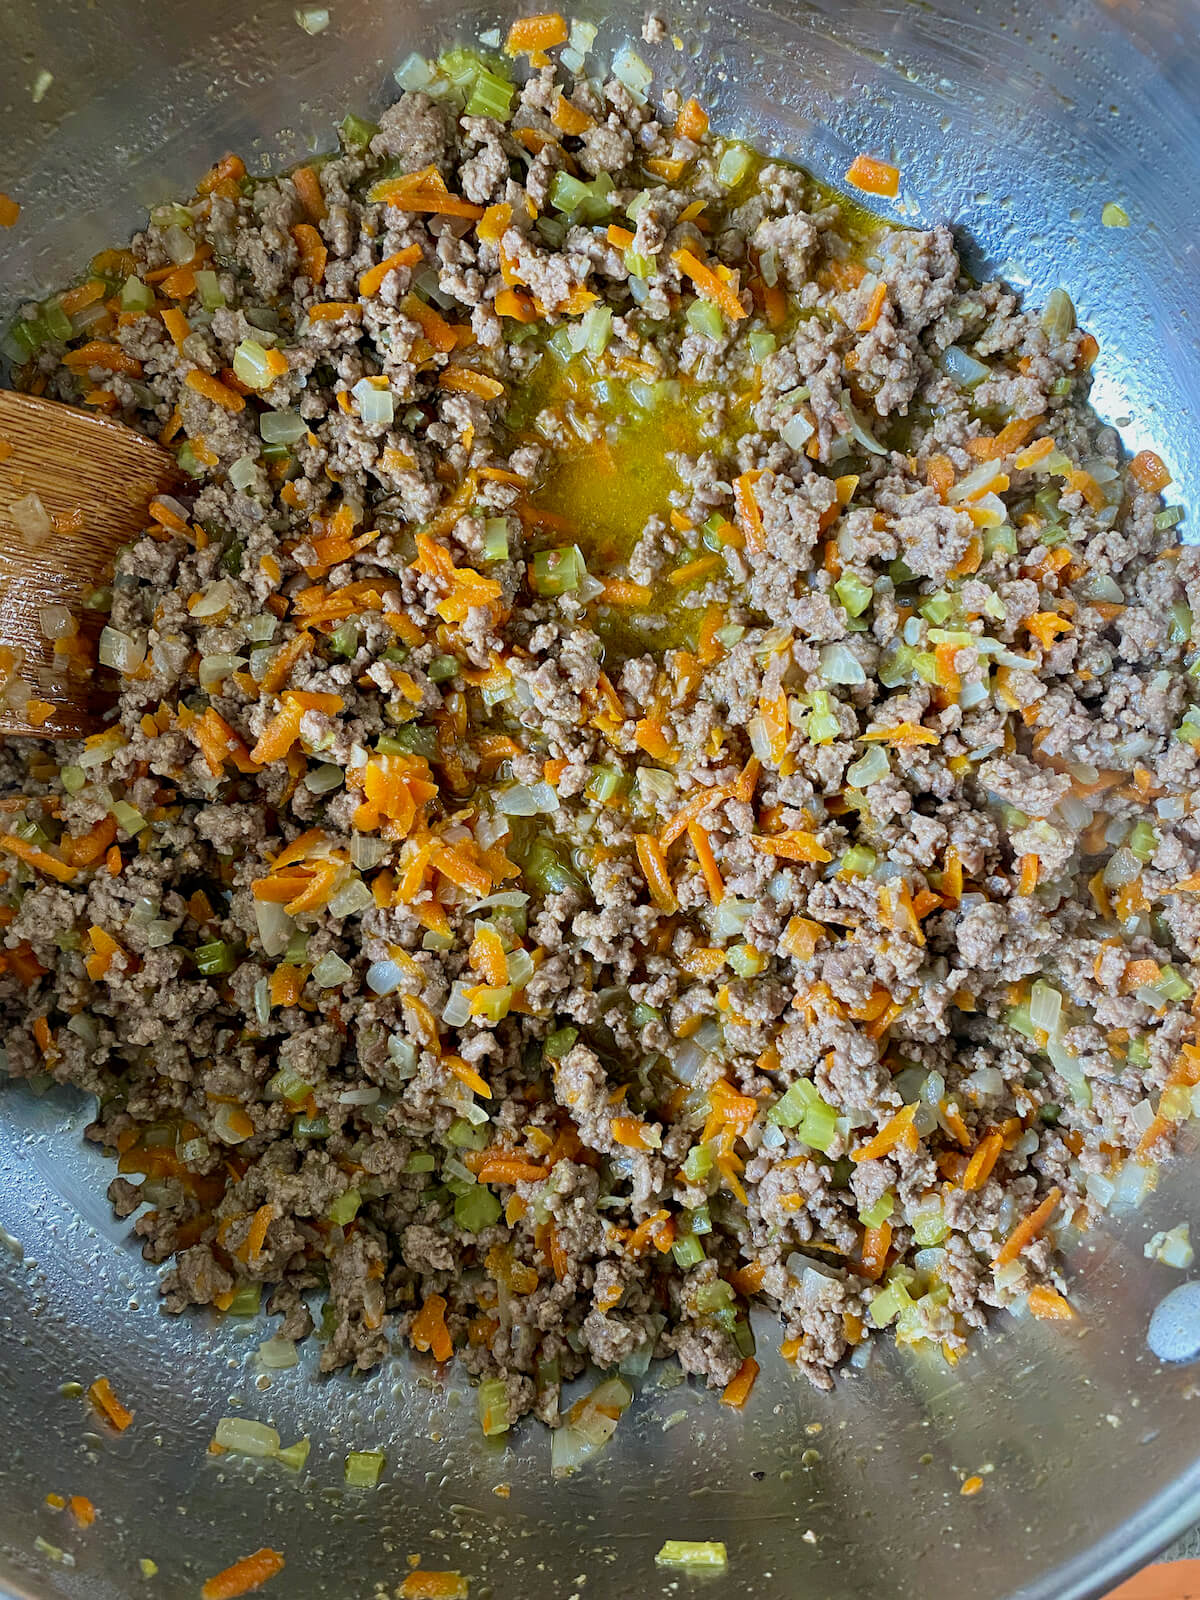 The ground beef and vegetables in a stainless steel pot after simmering in white wine.